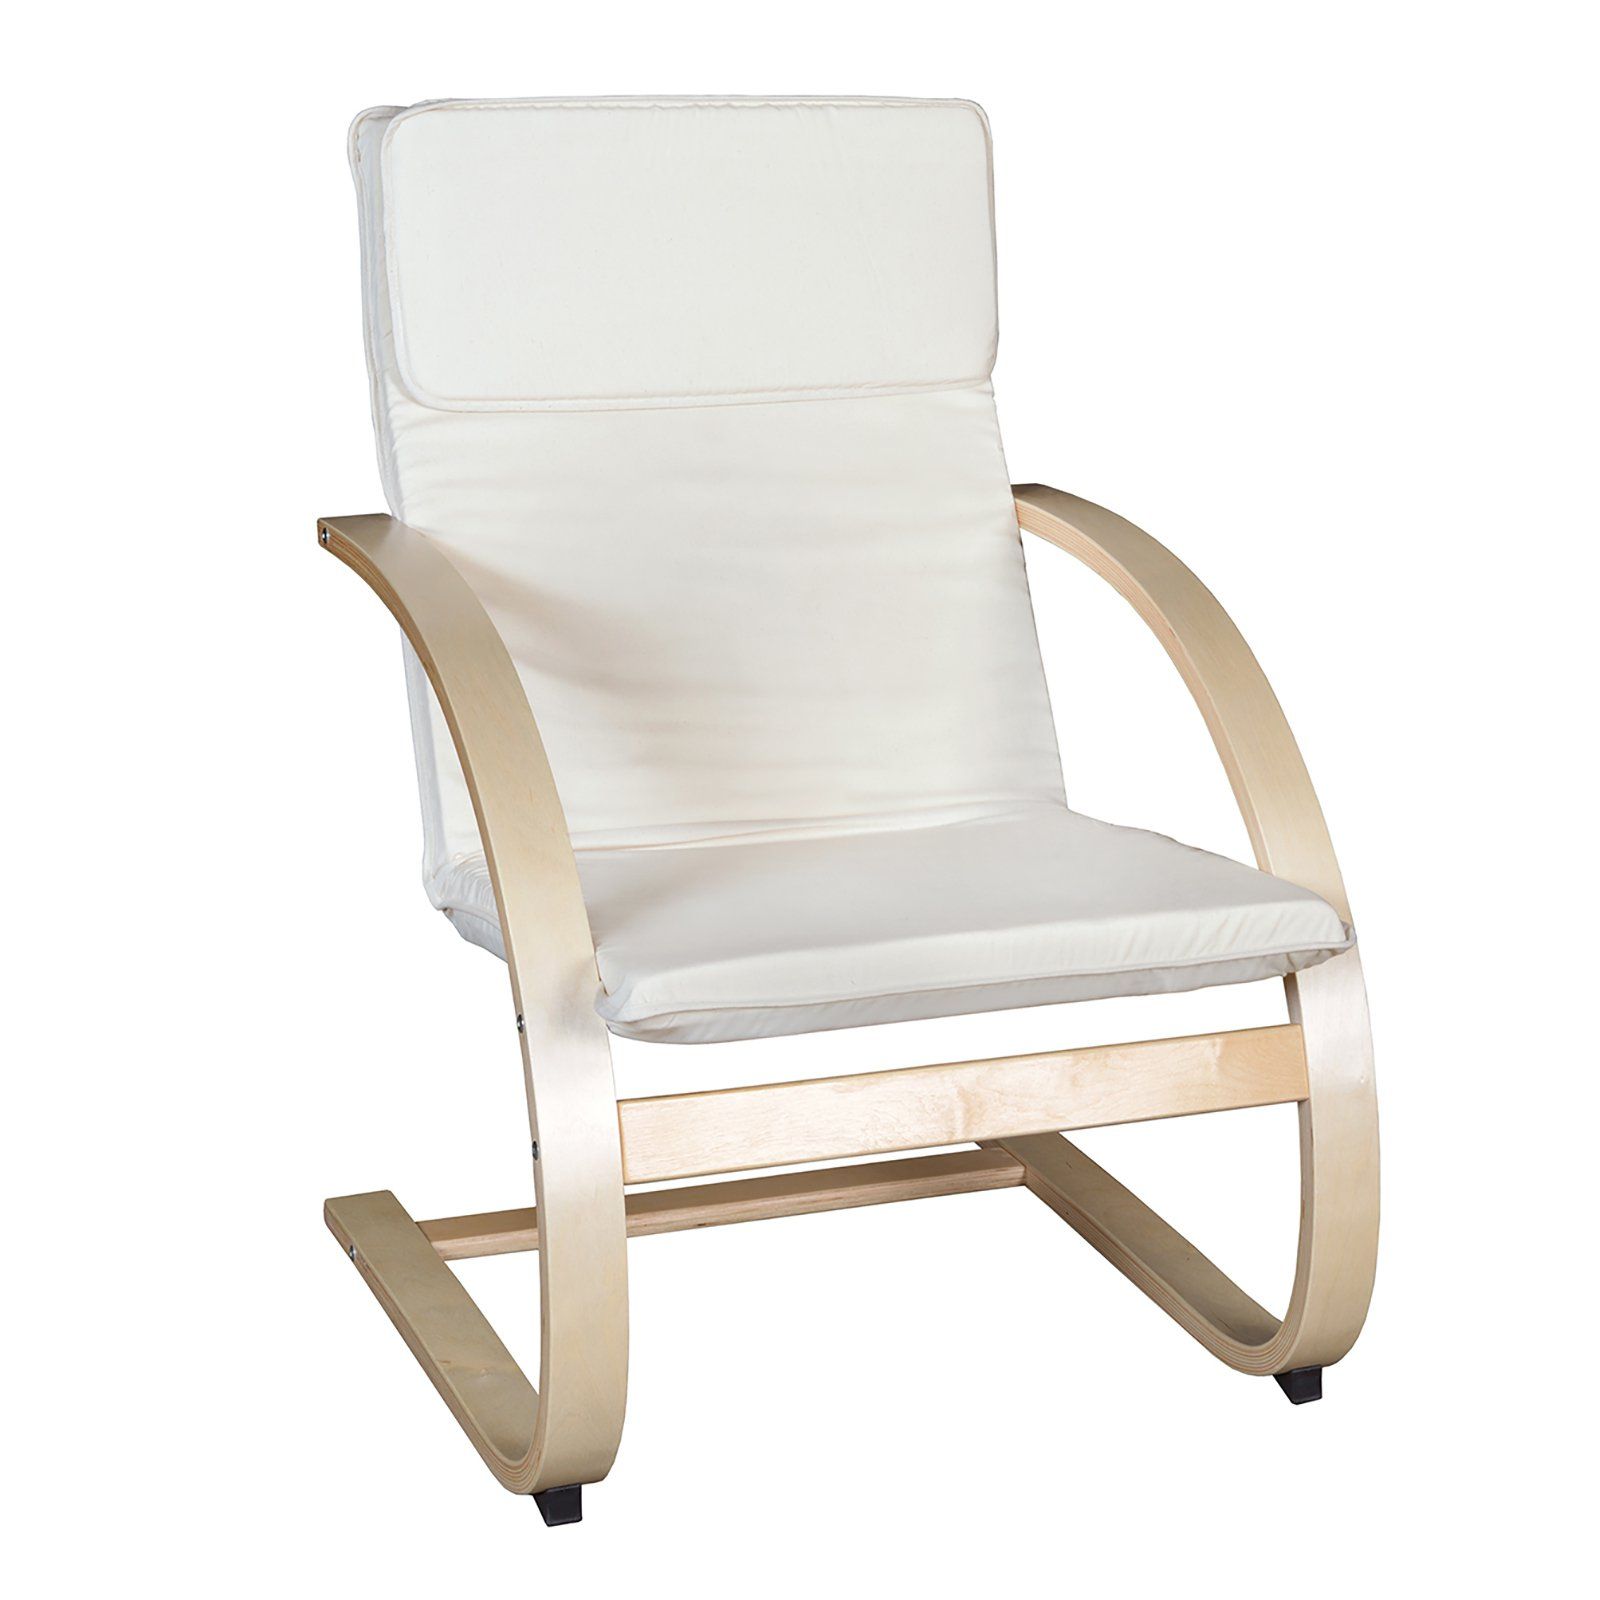 Outdoor Regency Niche Mia Bentwood Reclining Chair In 2019 Throughout Mia Bentwood Chairs (Photo 9 of 20)